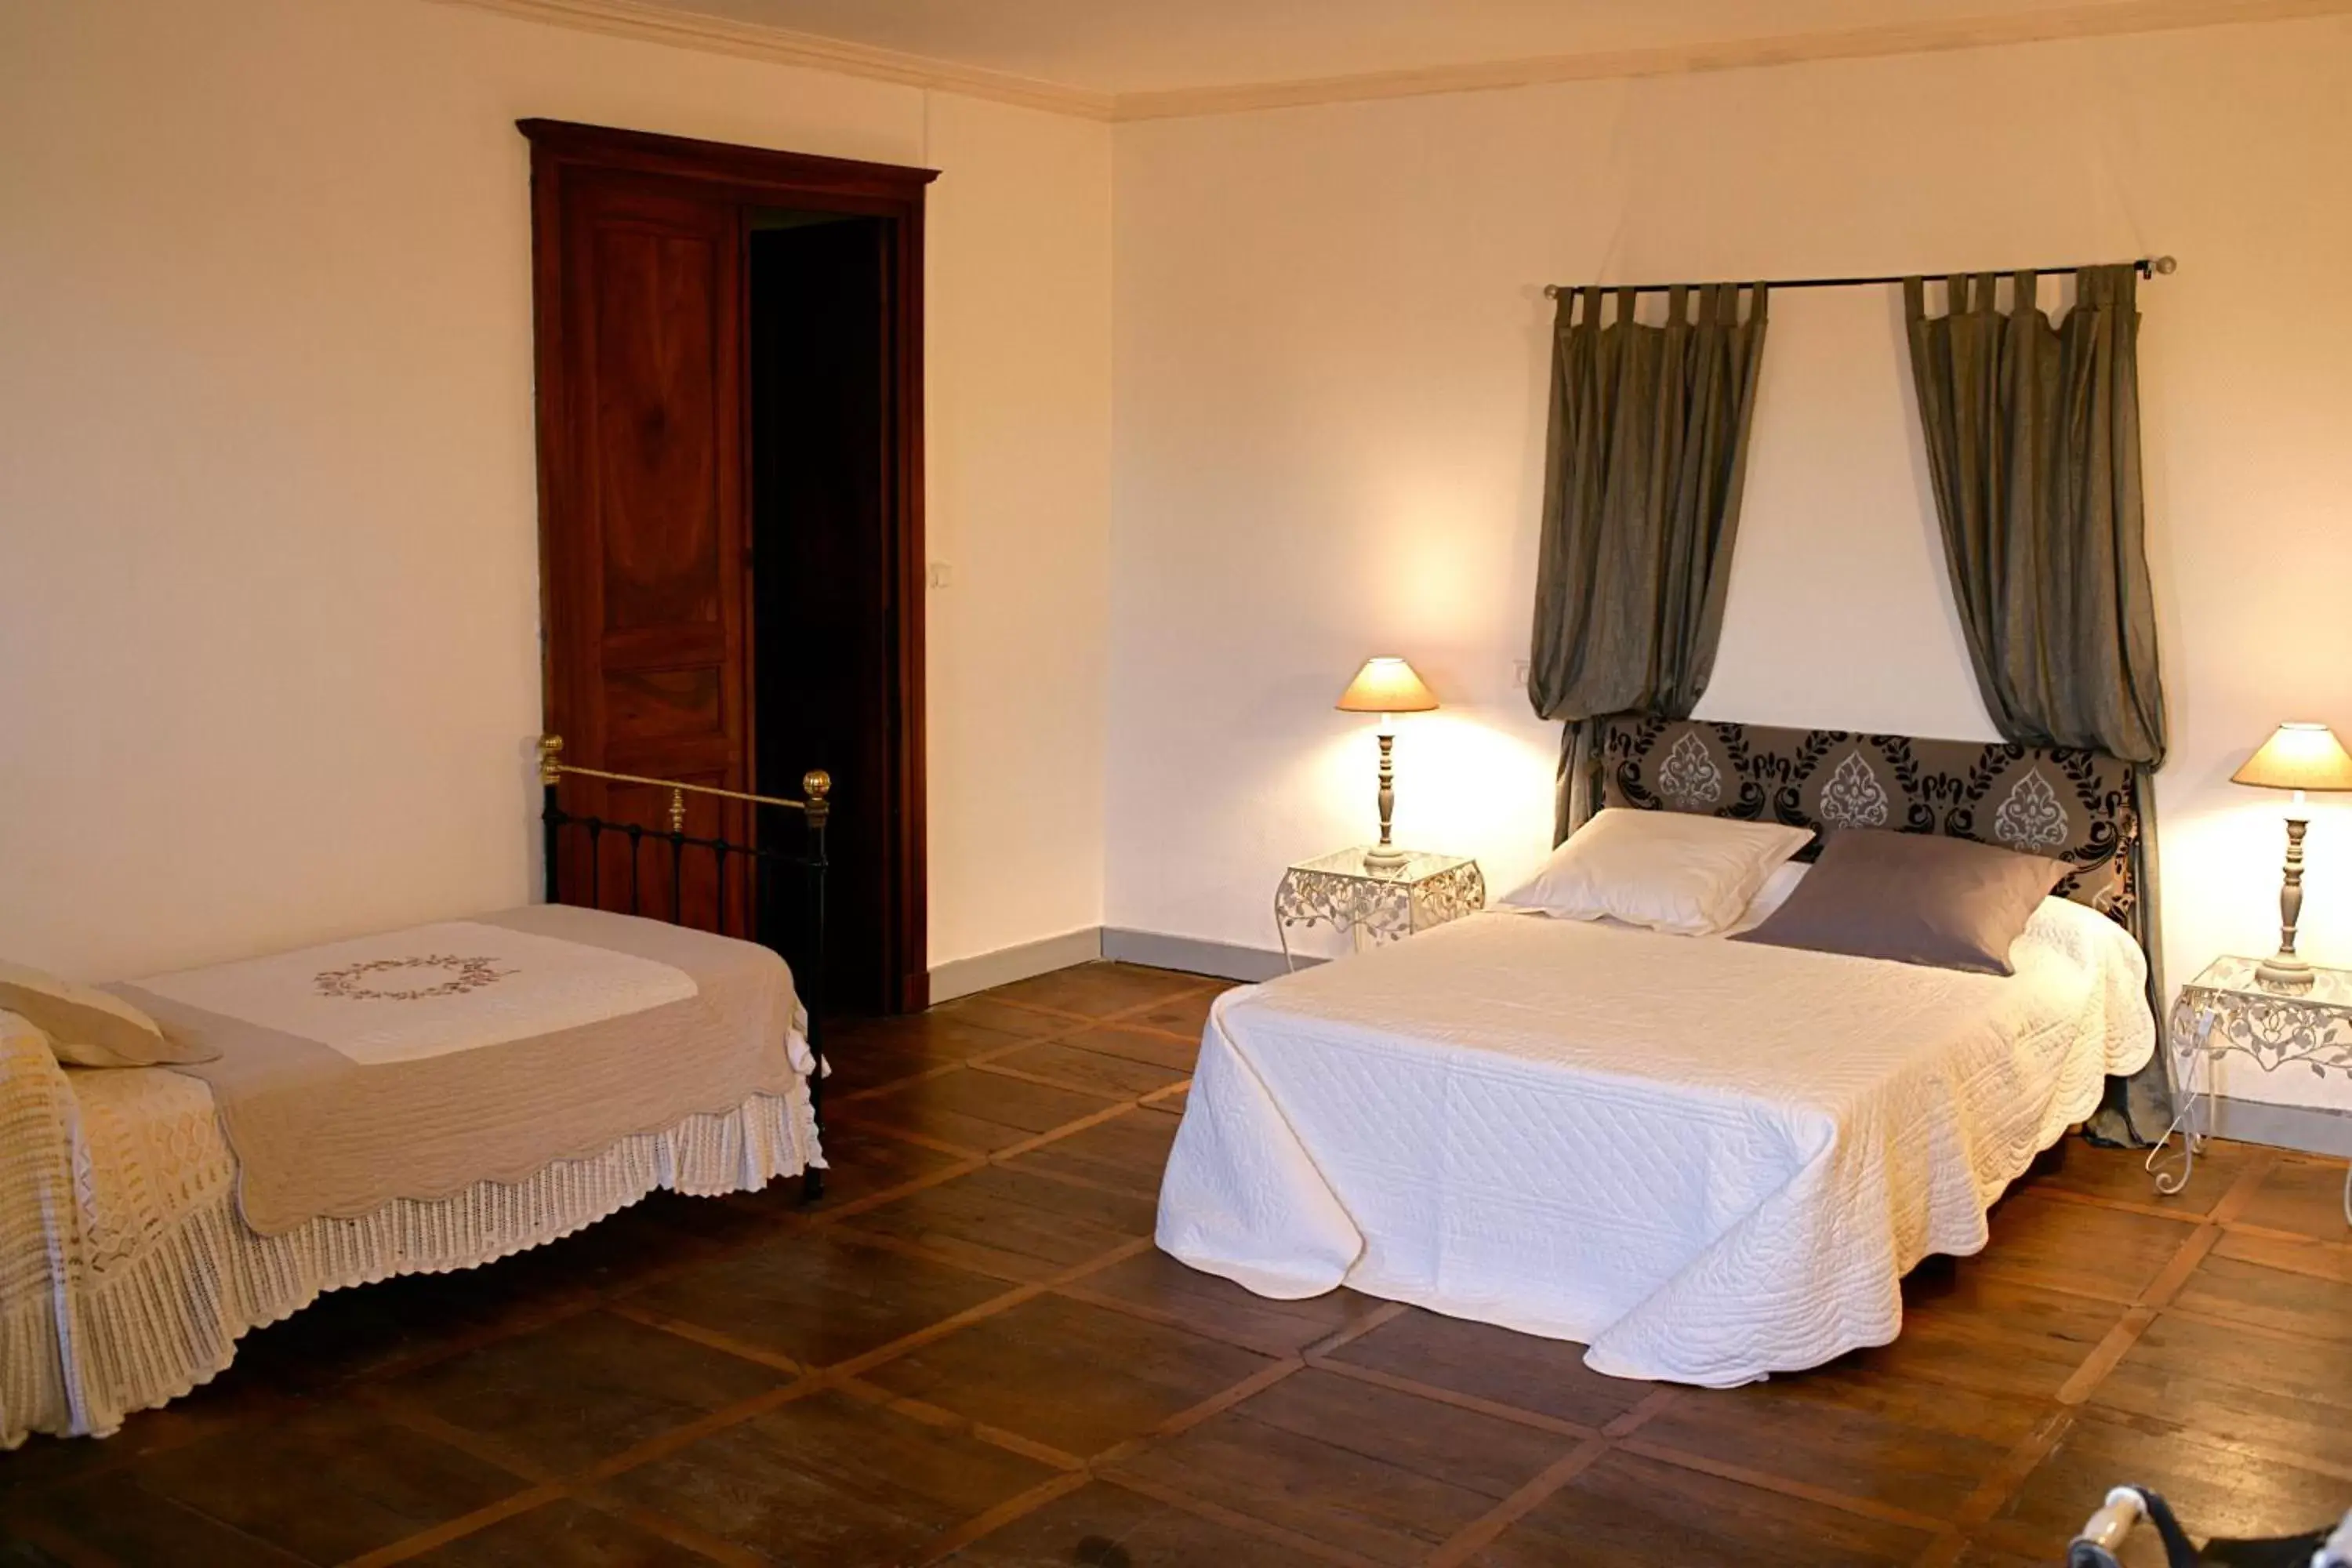 Bedroom, Room Photo in chambres de charme "Florence"